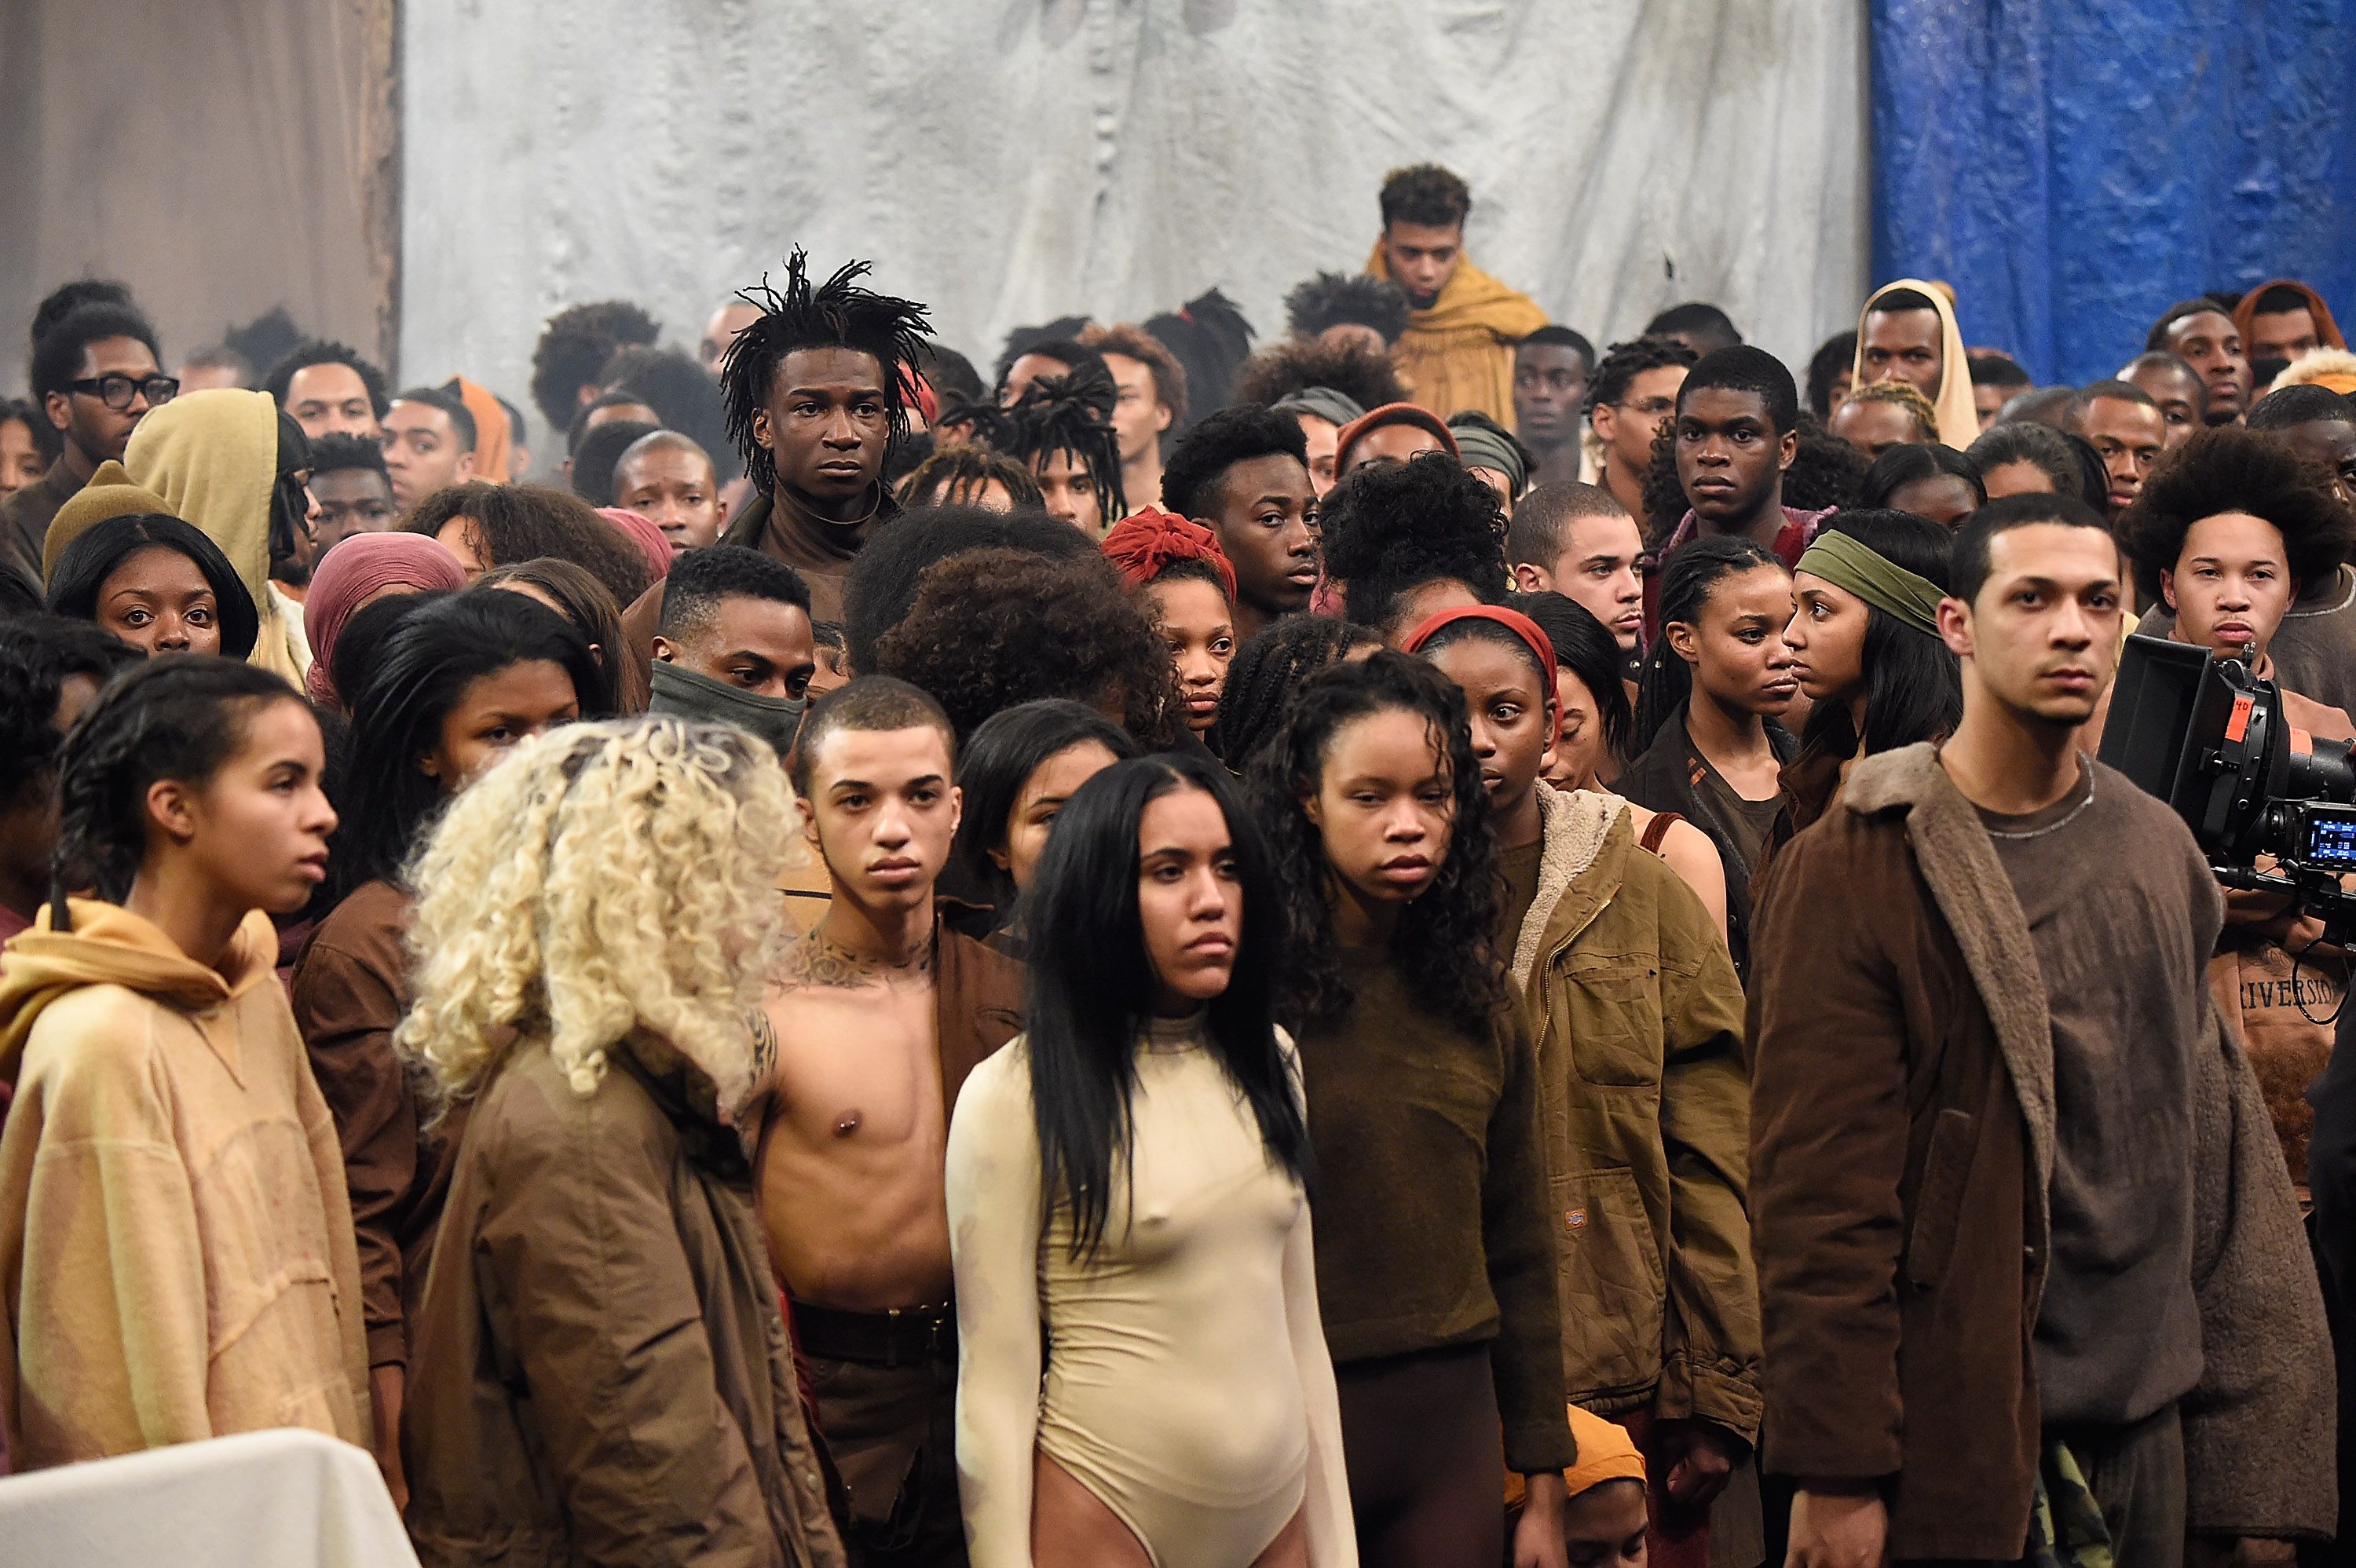 I Was Cast As An Extra In The Yeezy Season Show - Yeezy Season 3 Adidas Show Madison Square Garden